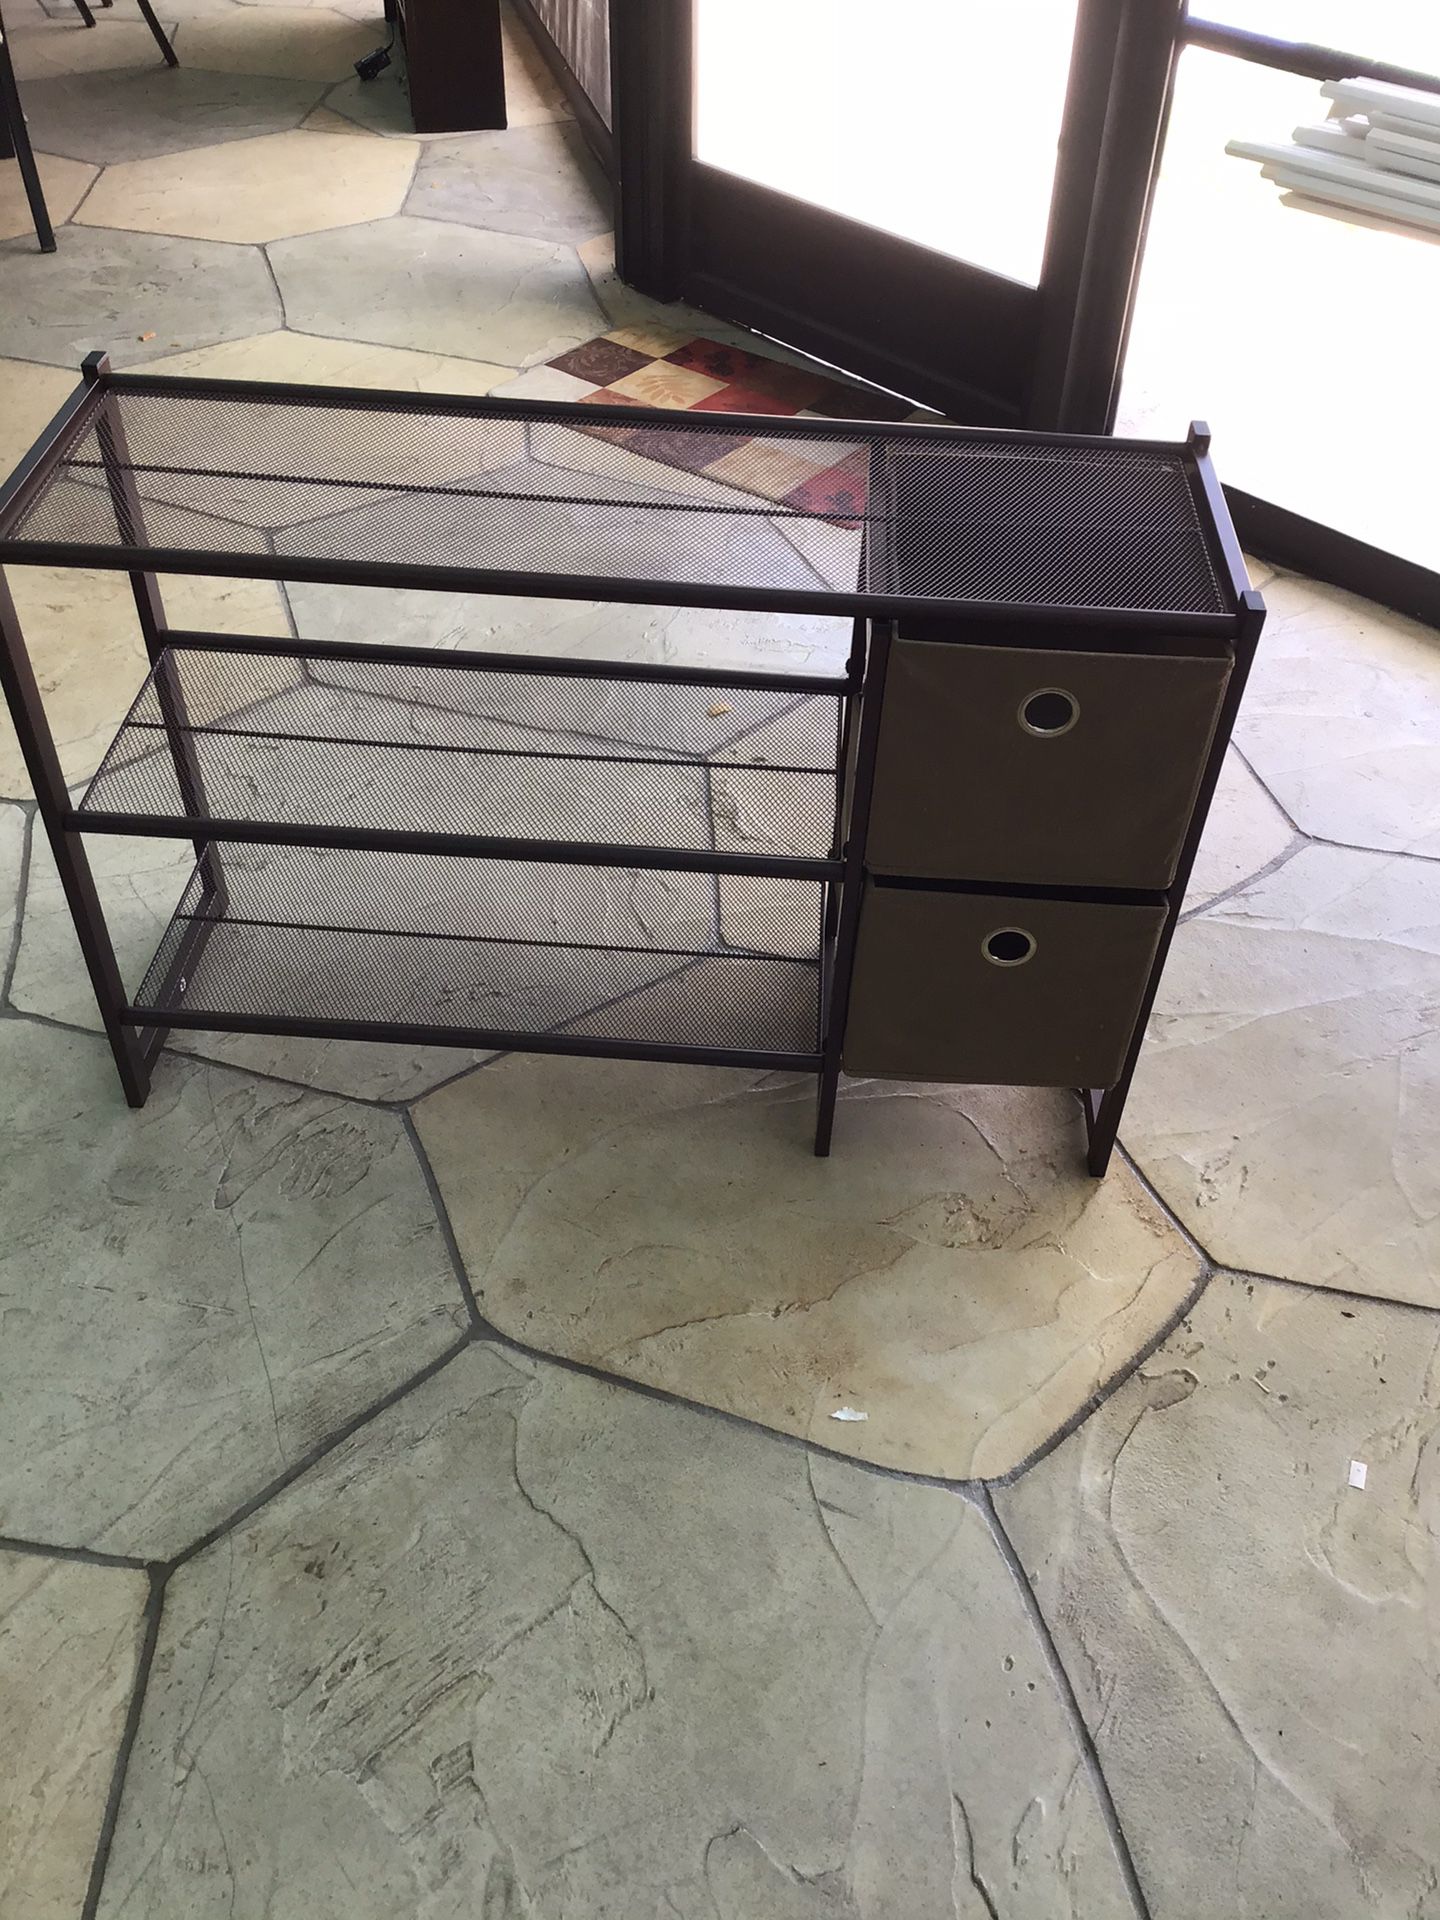 METAL BROWN CABINET SHOES WITH TWO CHAIRS DRAWERS